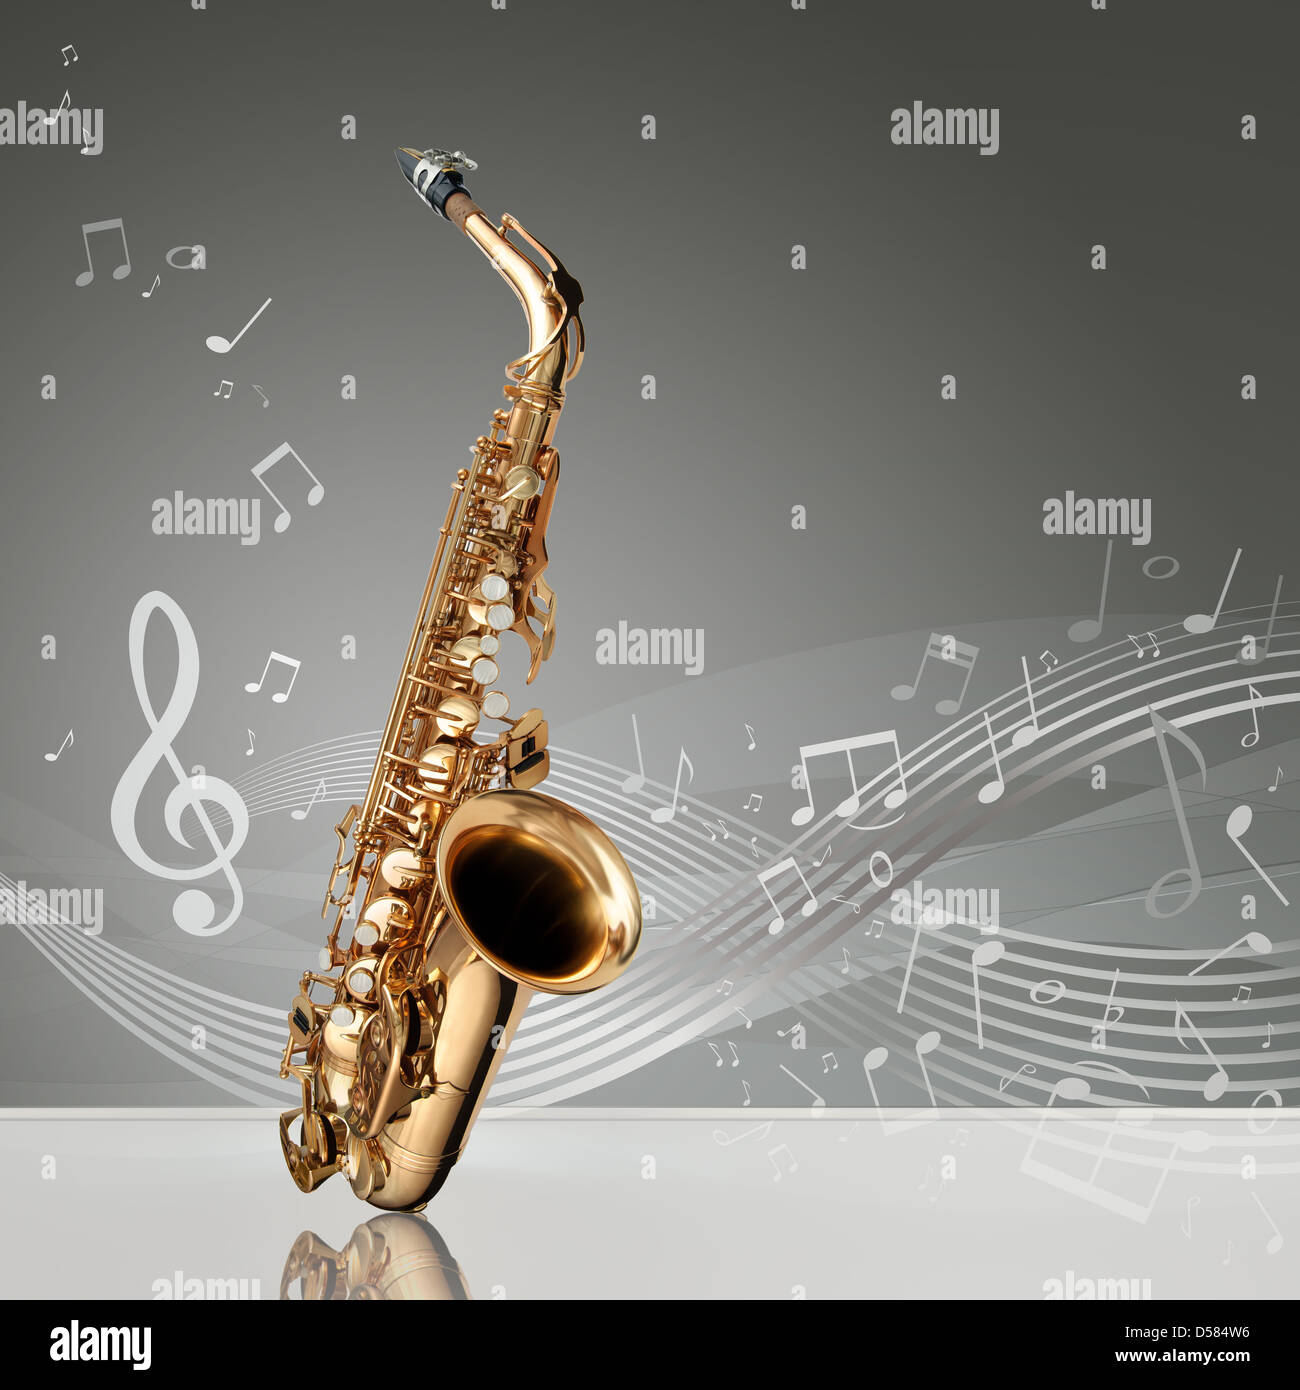 Saxophone with musical notes Stock Photo